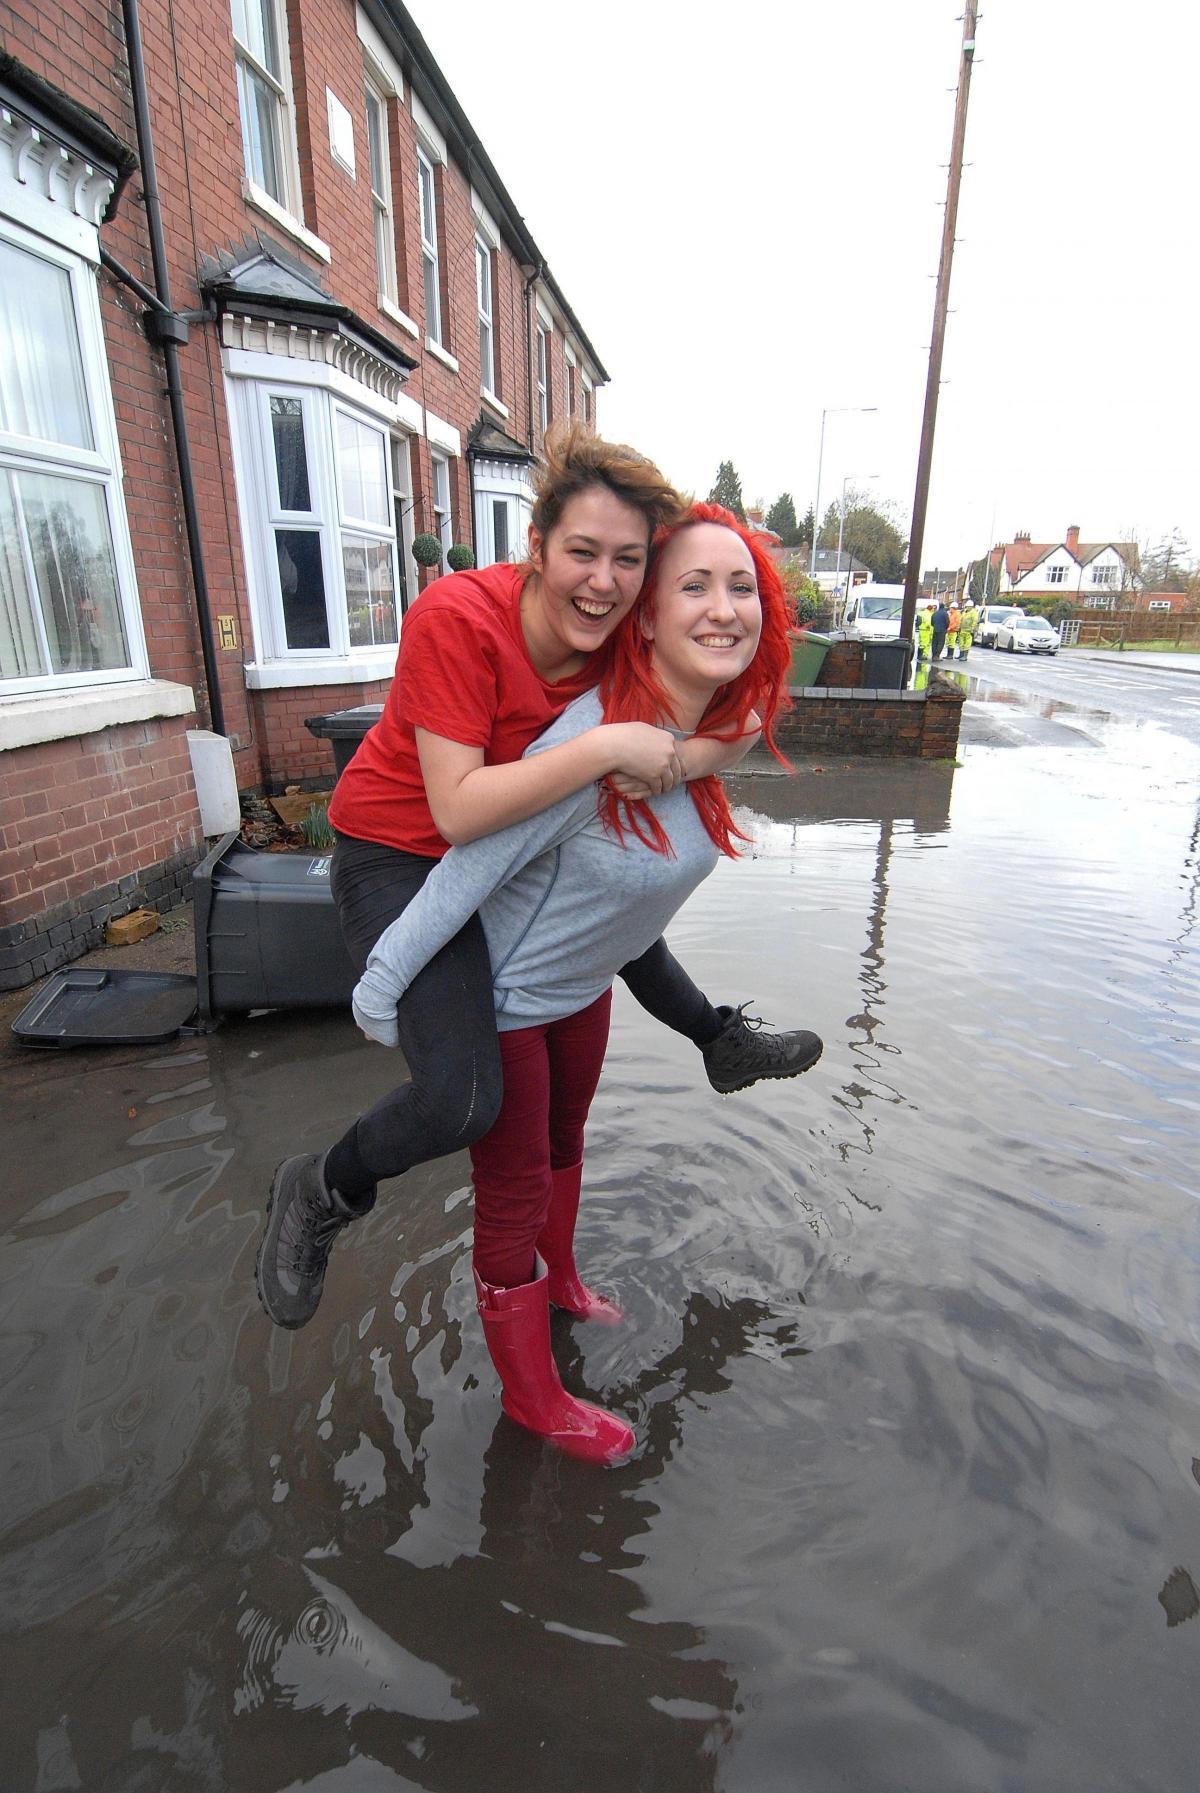  Students Vicky Potts and Claire Wearing are in good spirits despite the flooding on Hylton Road in Worcester. 0714520303